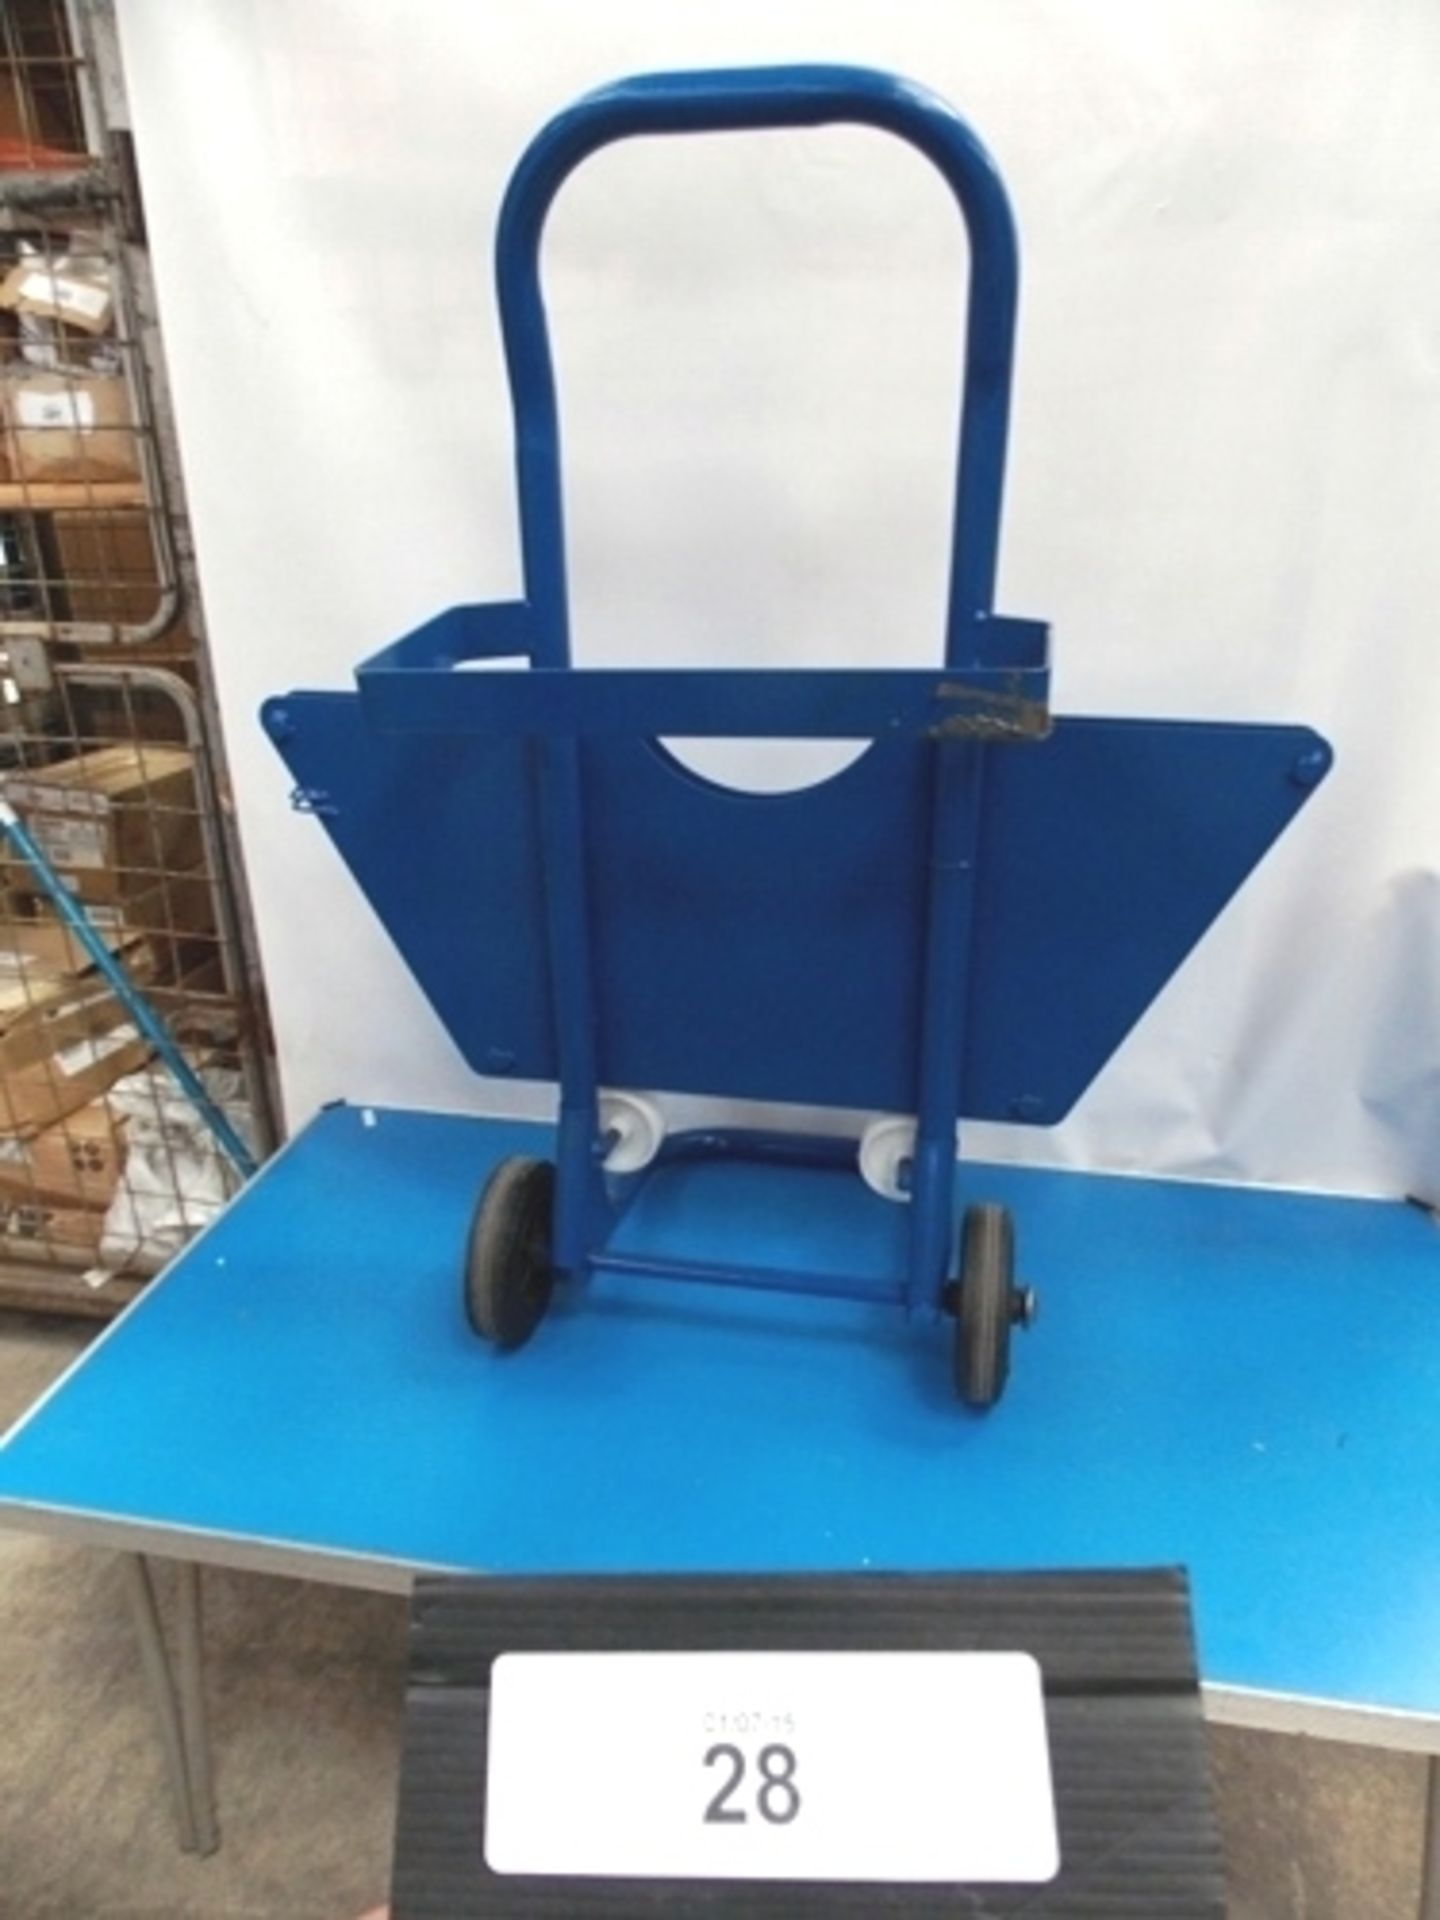 An unbranded strapping tool trolley, colour blue - New, unboxed, few light scuffs